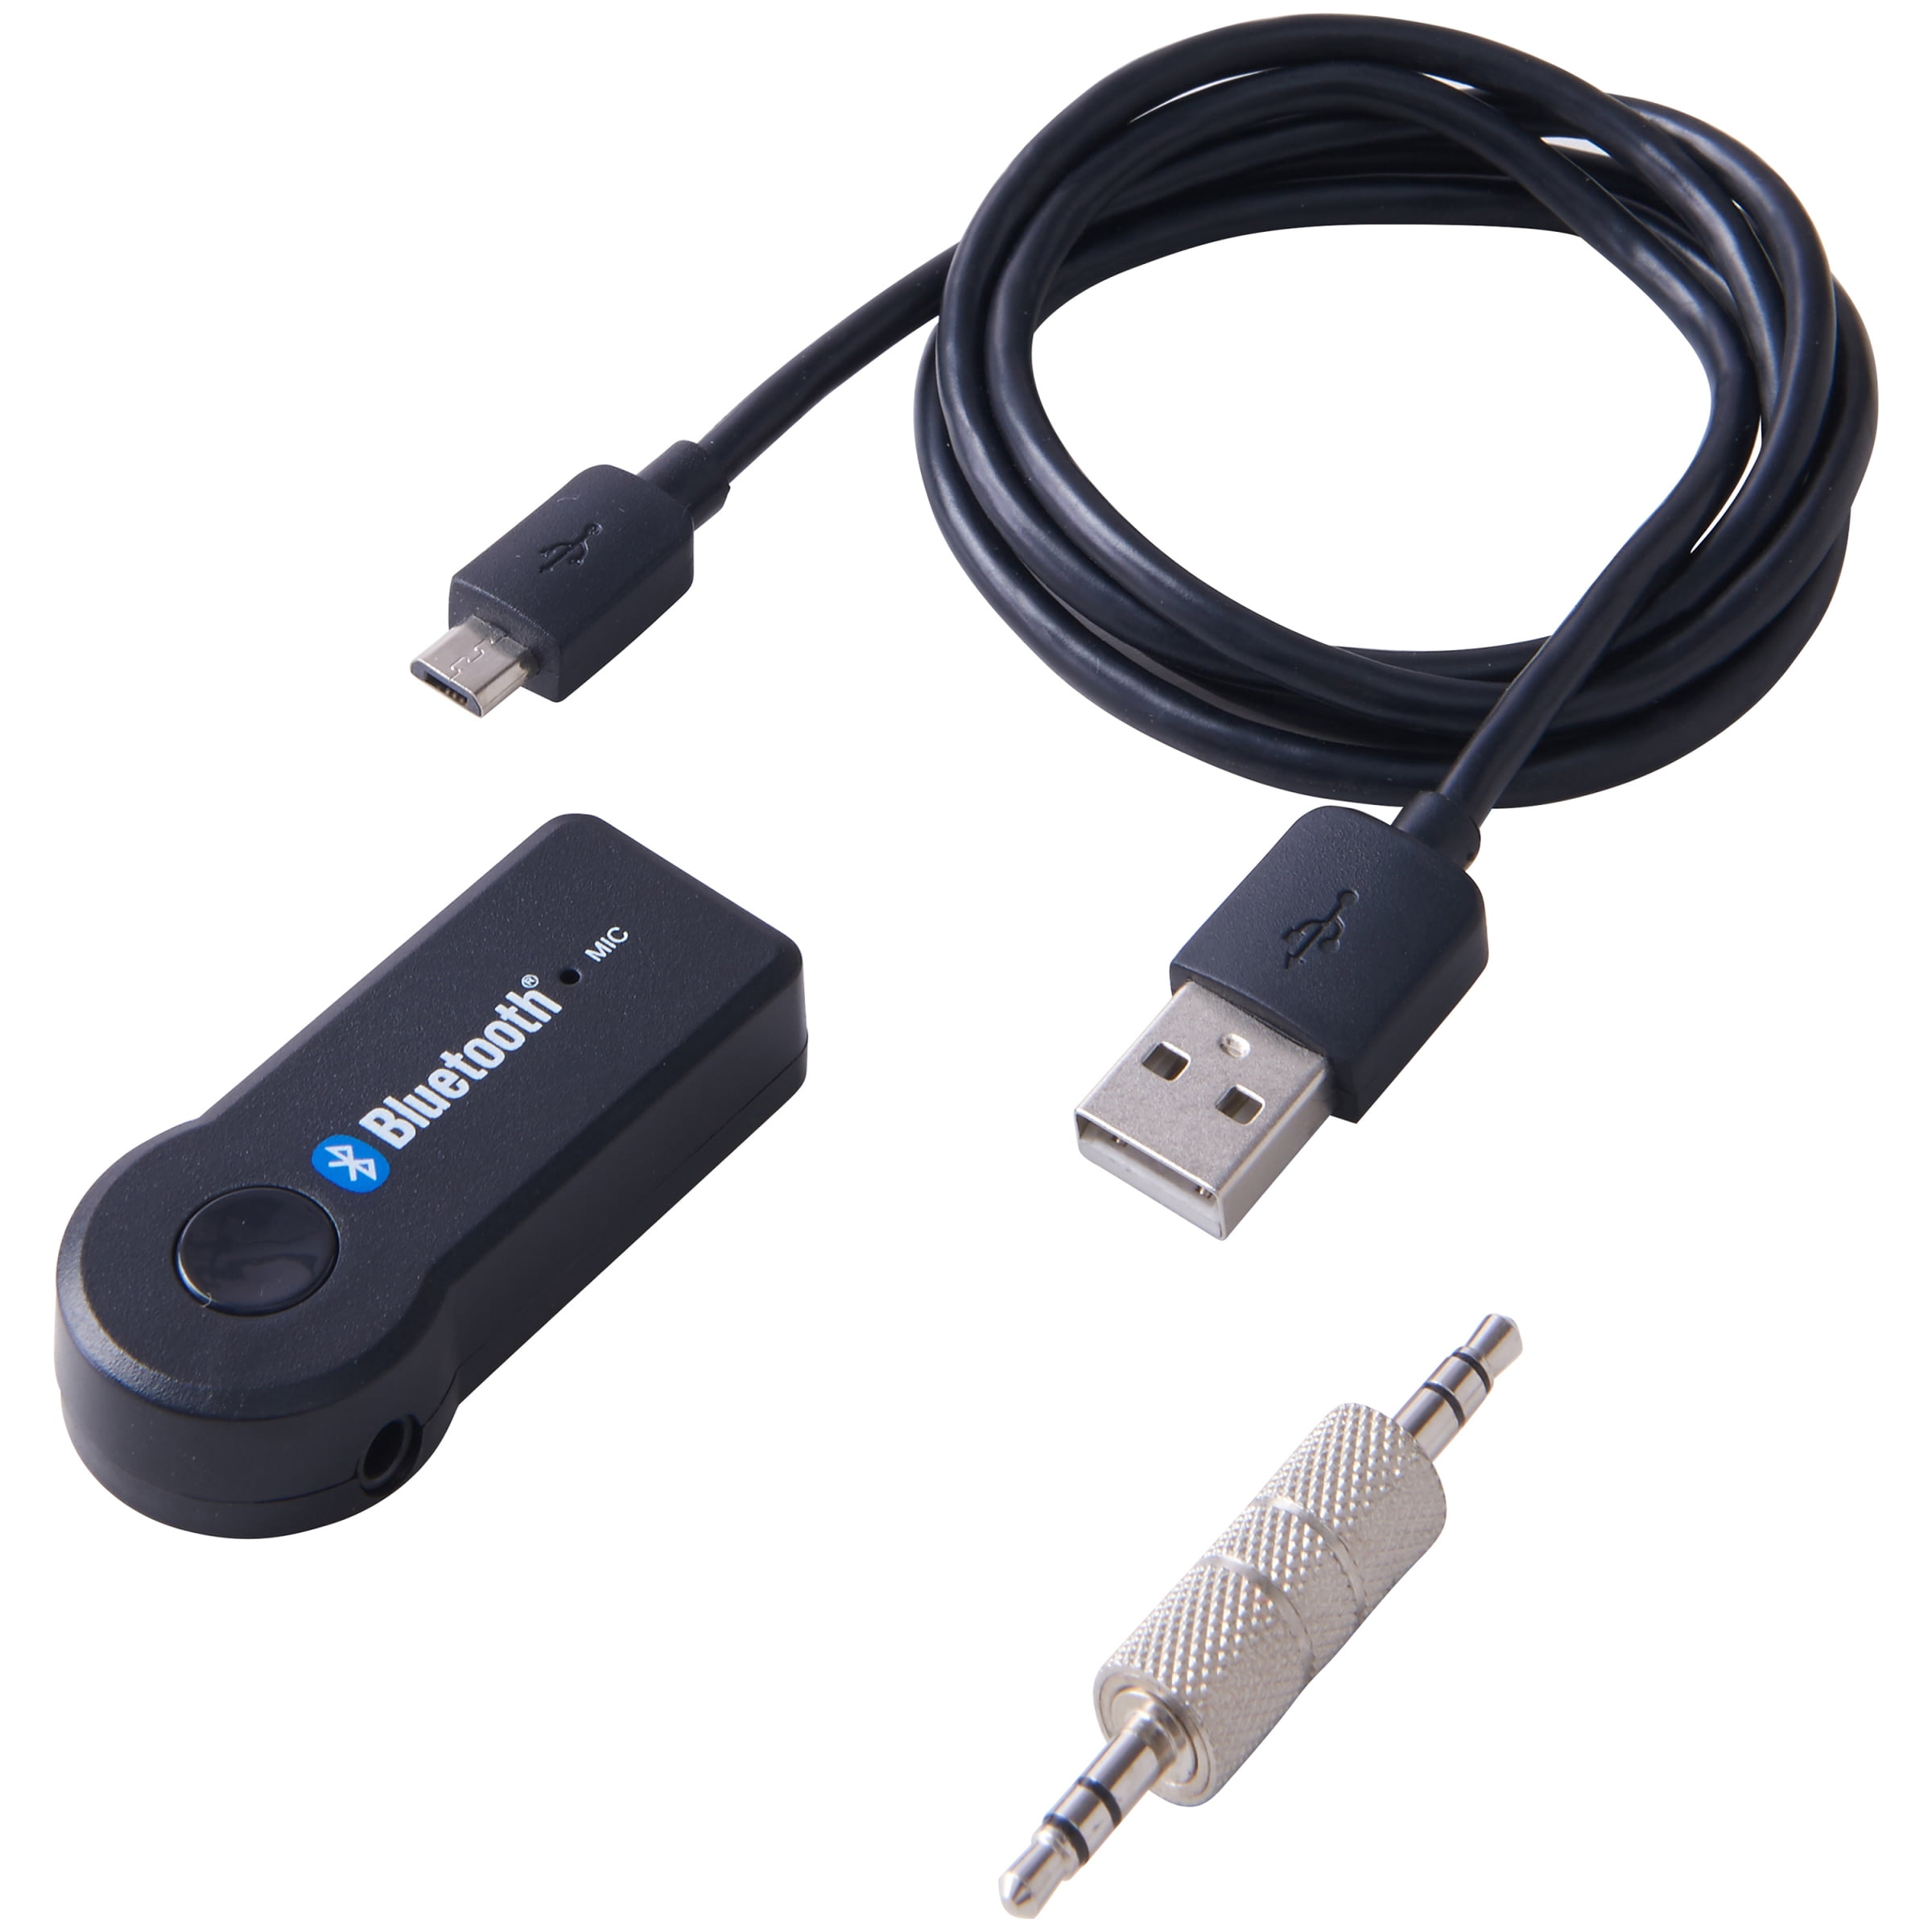 technisch uitsterven Overlappen Blackweb Bluetooth Audio Receiver Adapter - Pairs and Streams Audio From  Bluetooth-Enabled Devices to Non-Bluetooth Devices With a 3.5mm Audio Jack  - Walmart.com